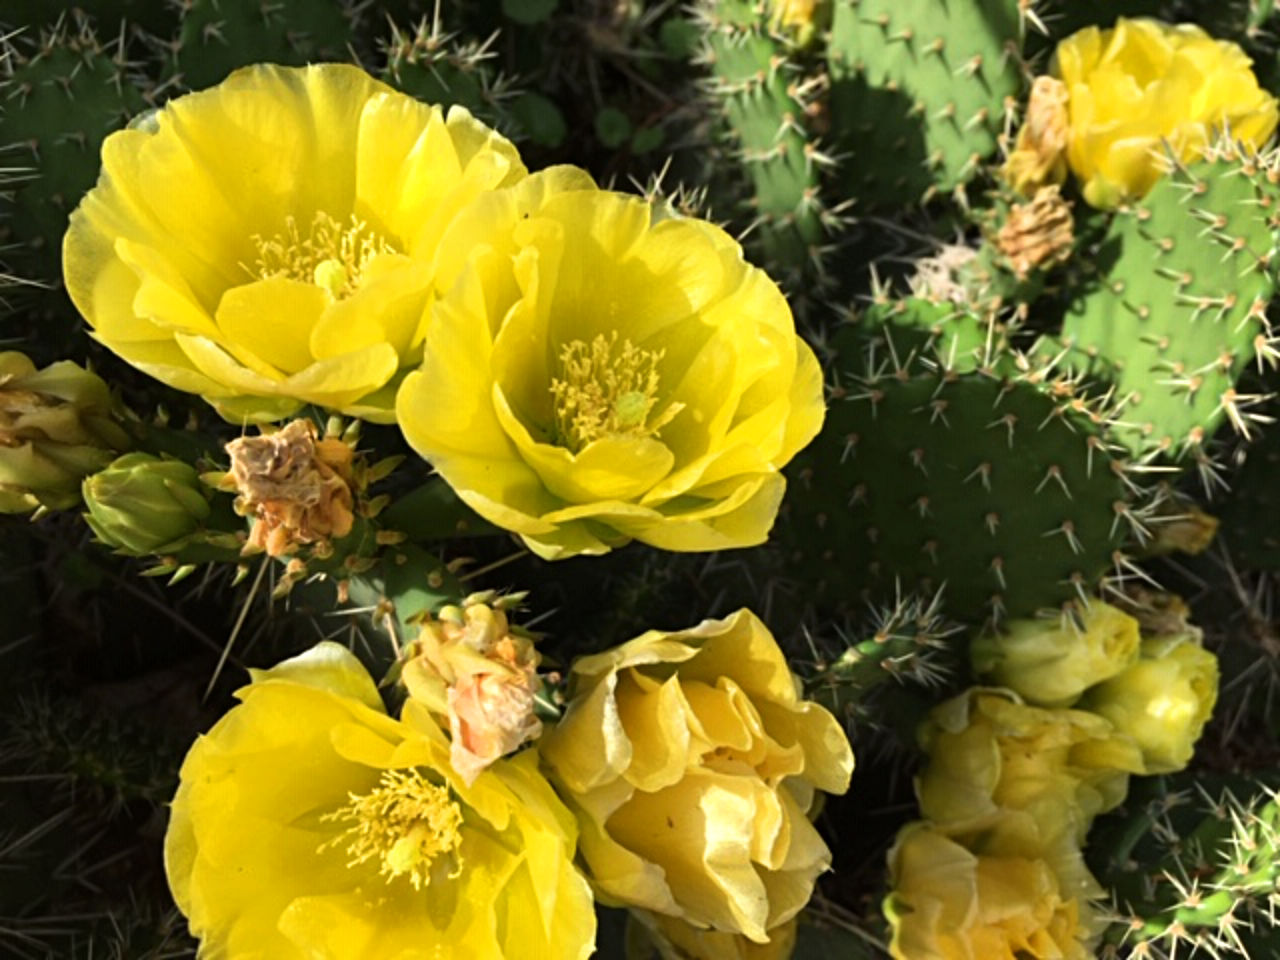 yellow flower blossoms atop oval-shaped, spiked cactus leaves